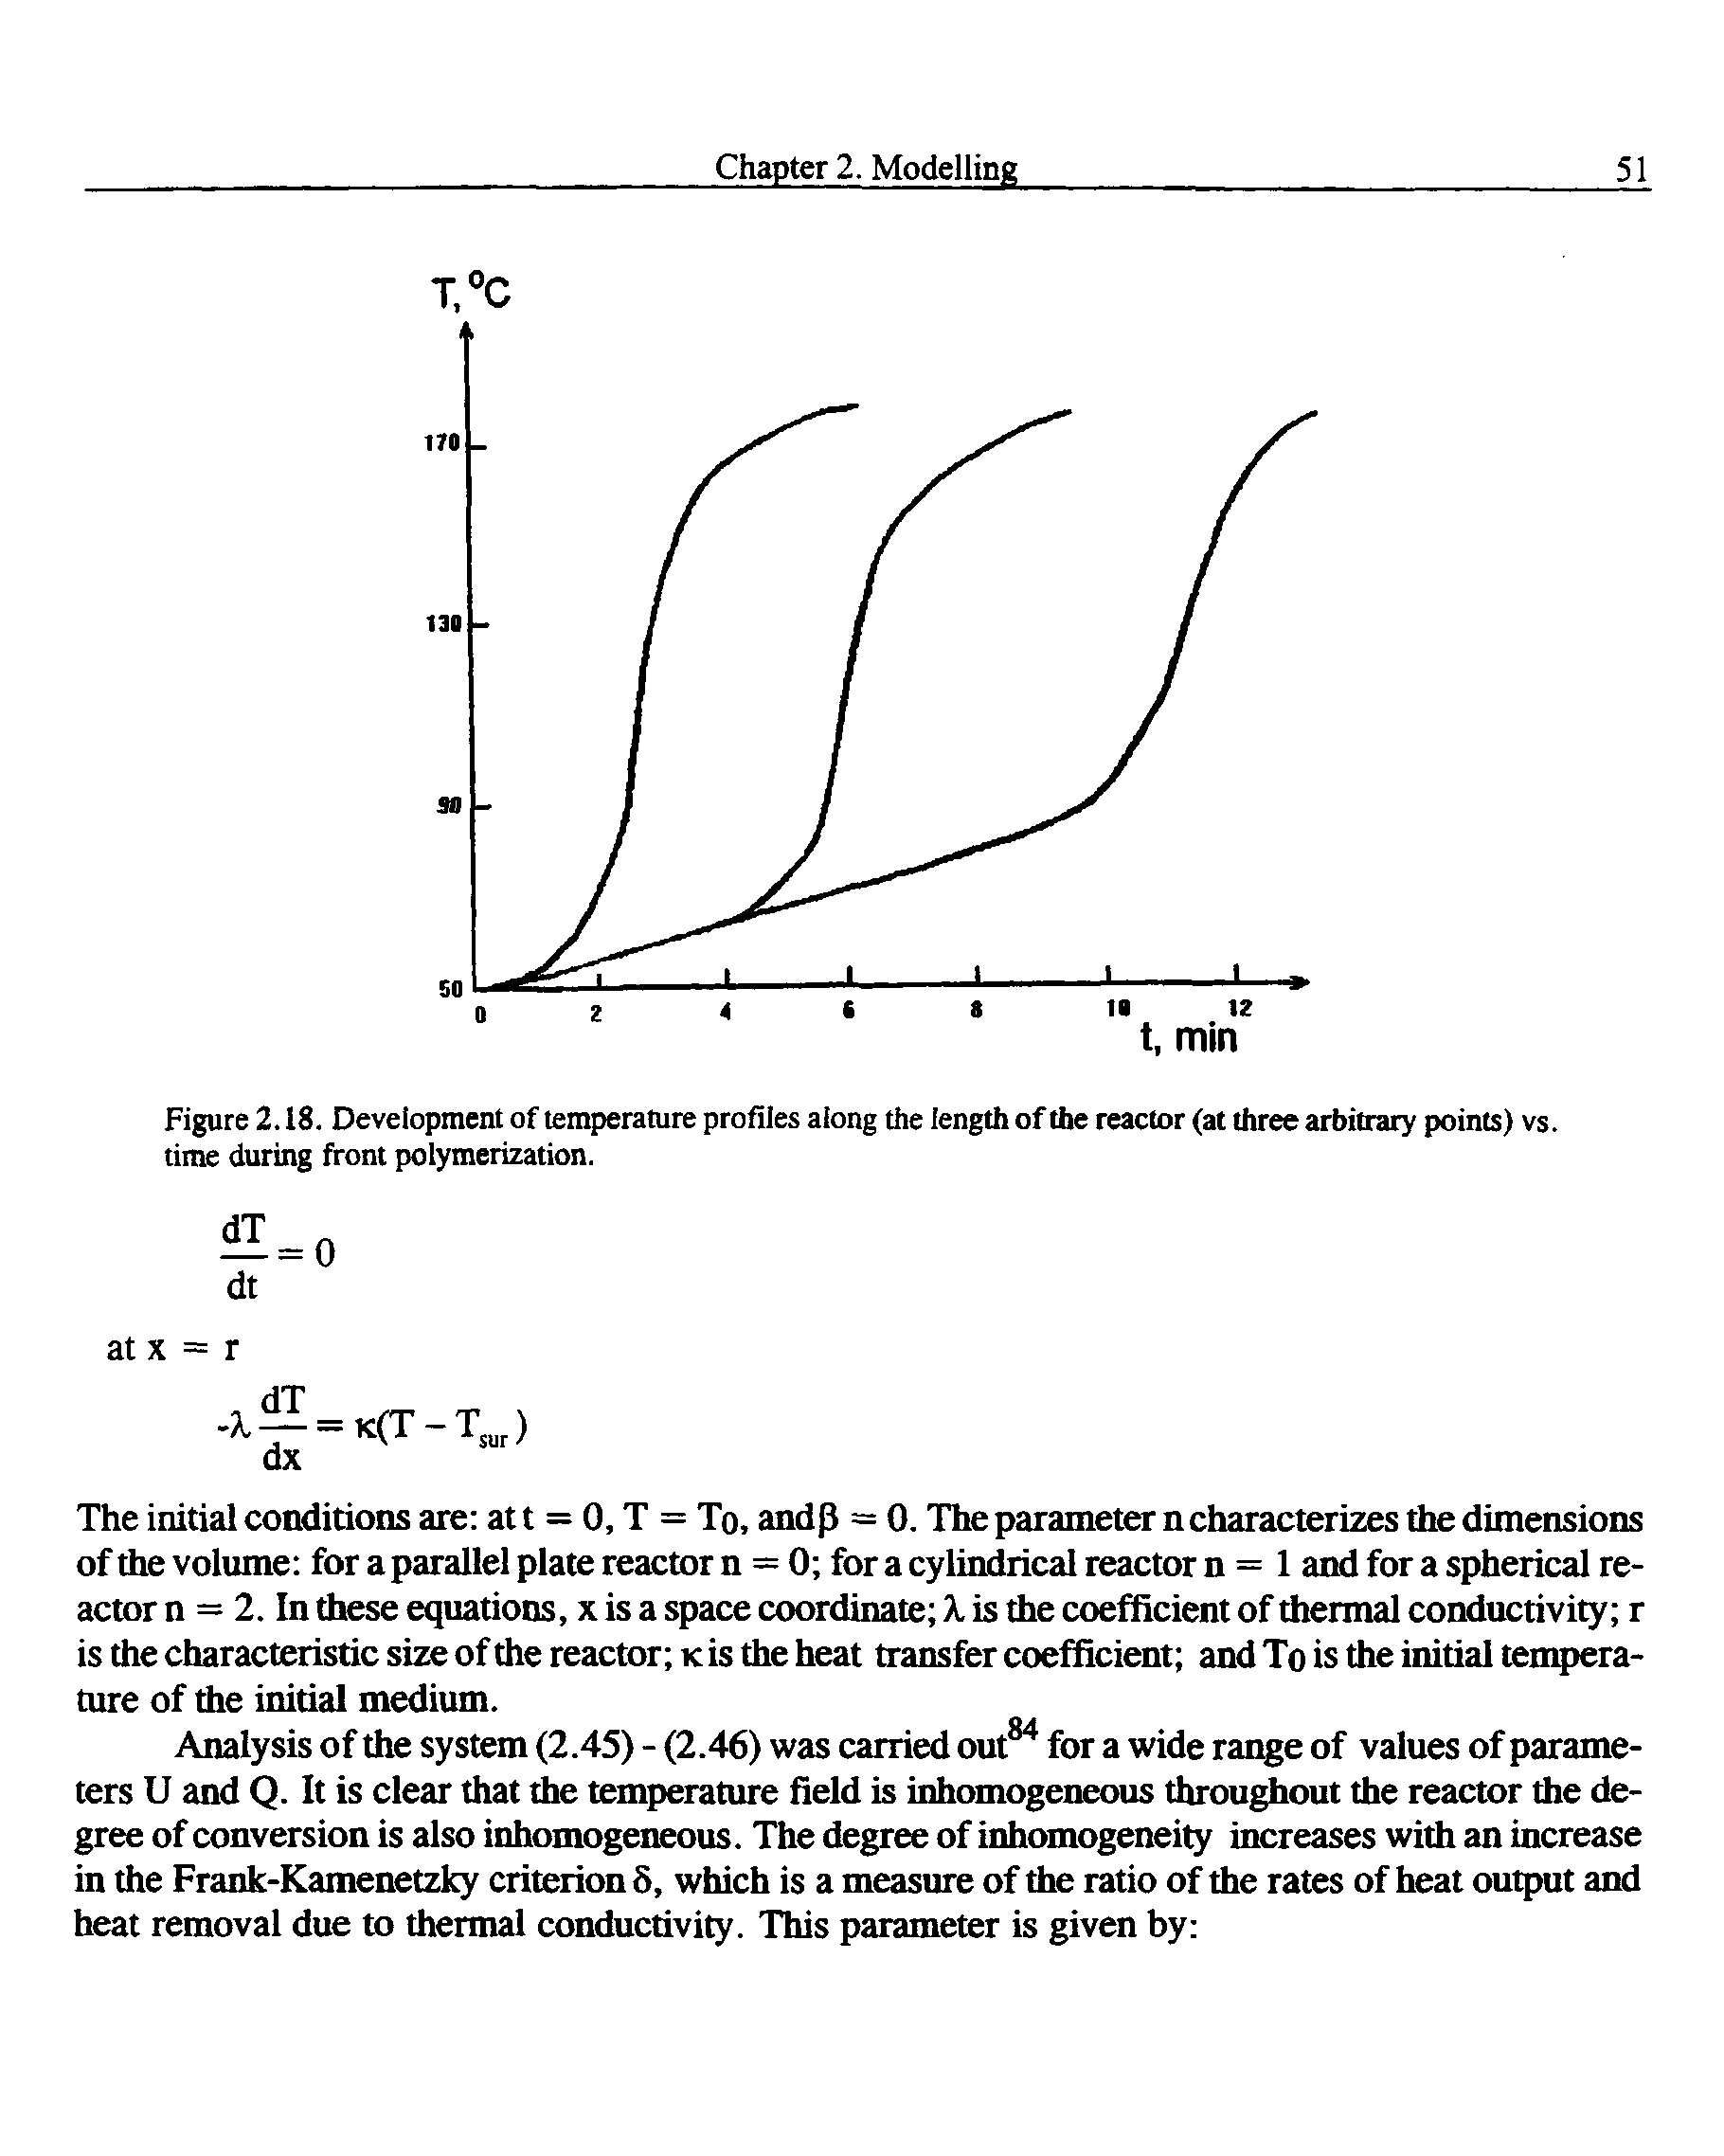 Figure 2.18. Development of temperature profiles along the length of the reactor (at three arbitrary points) vs. time during front polymerization.